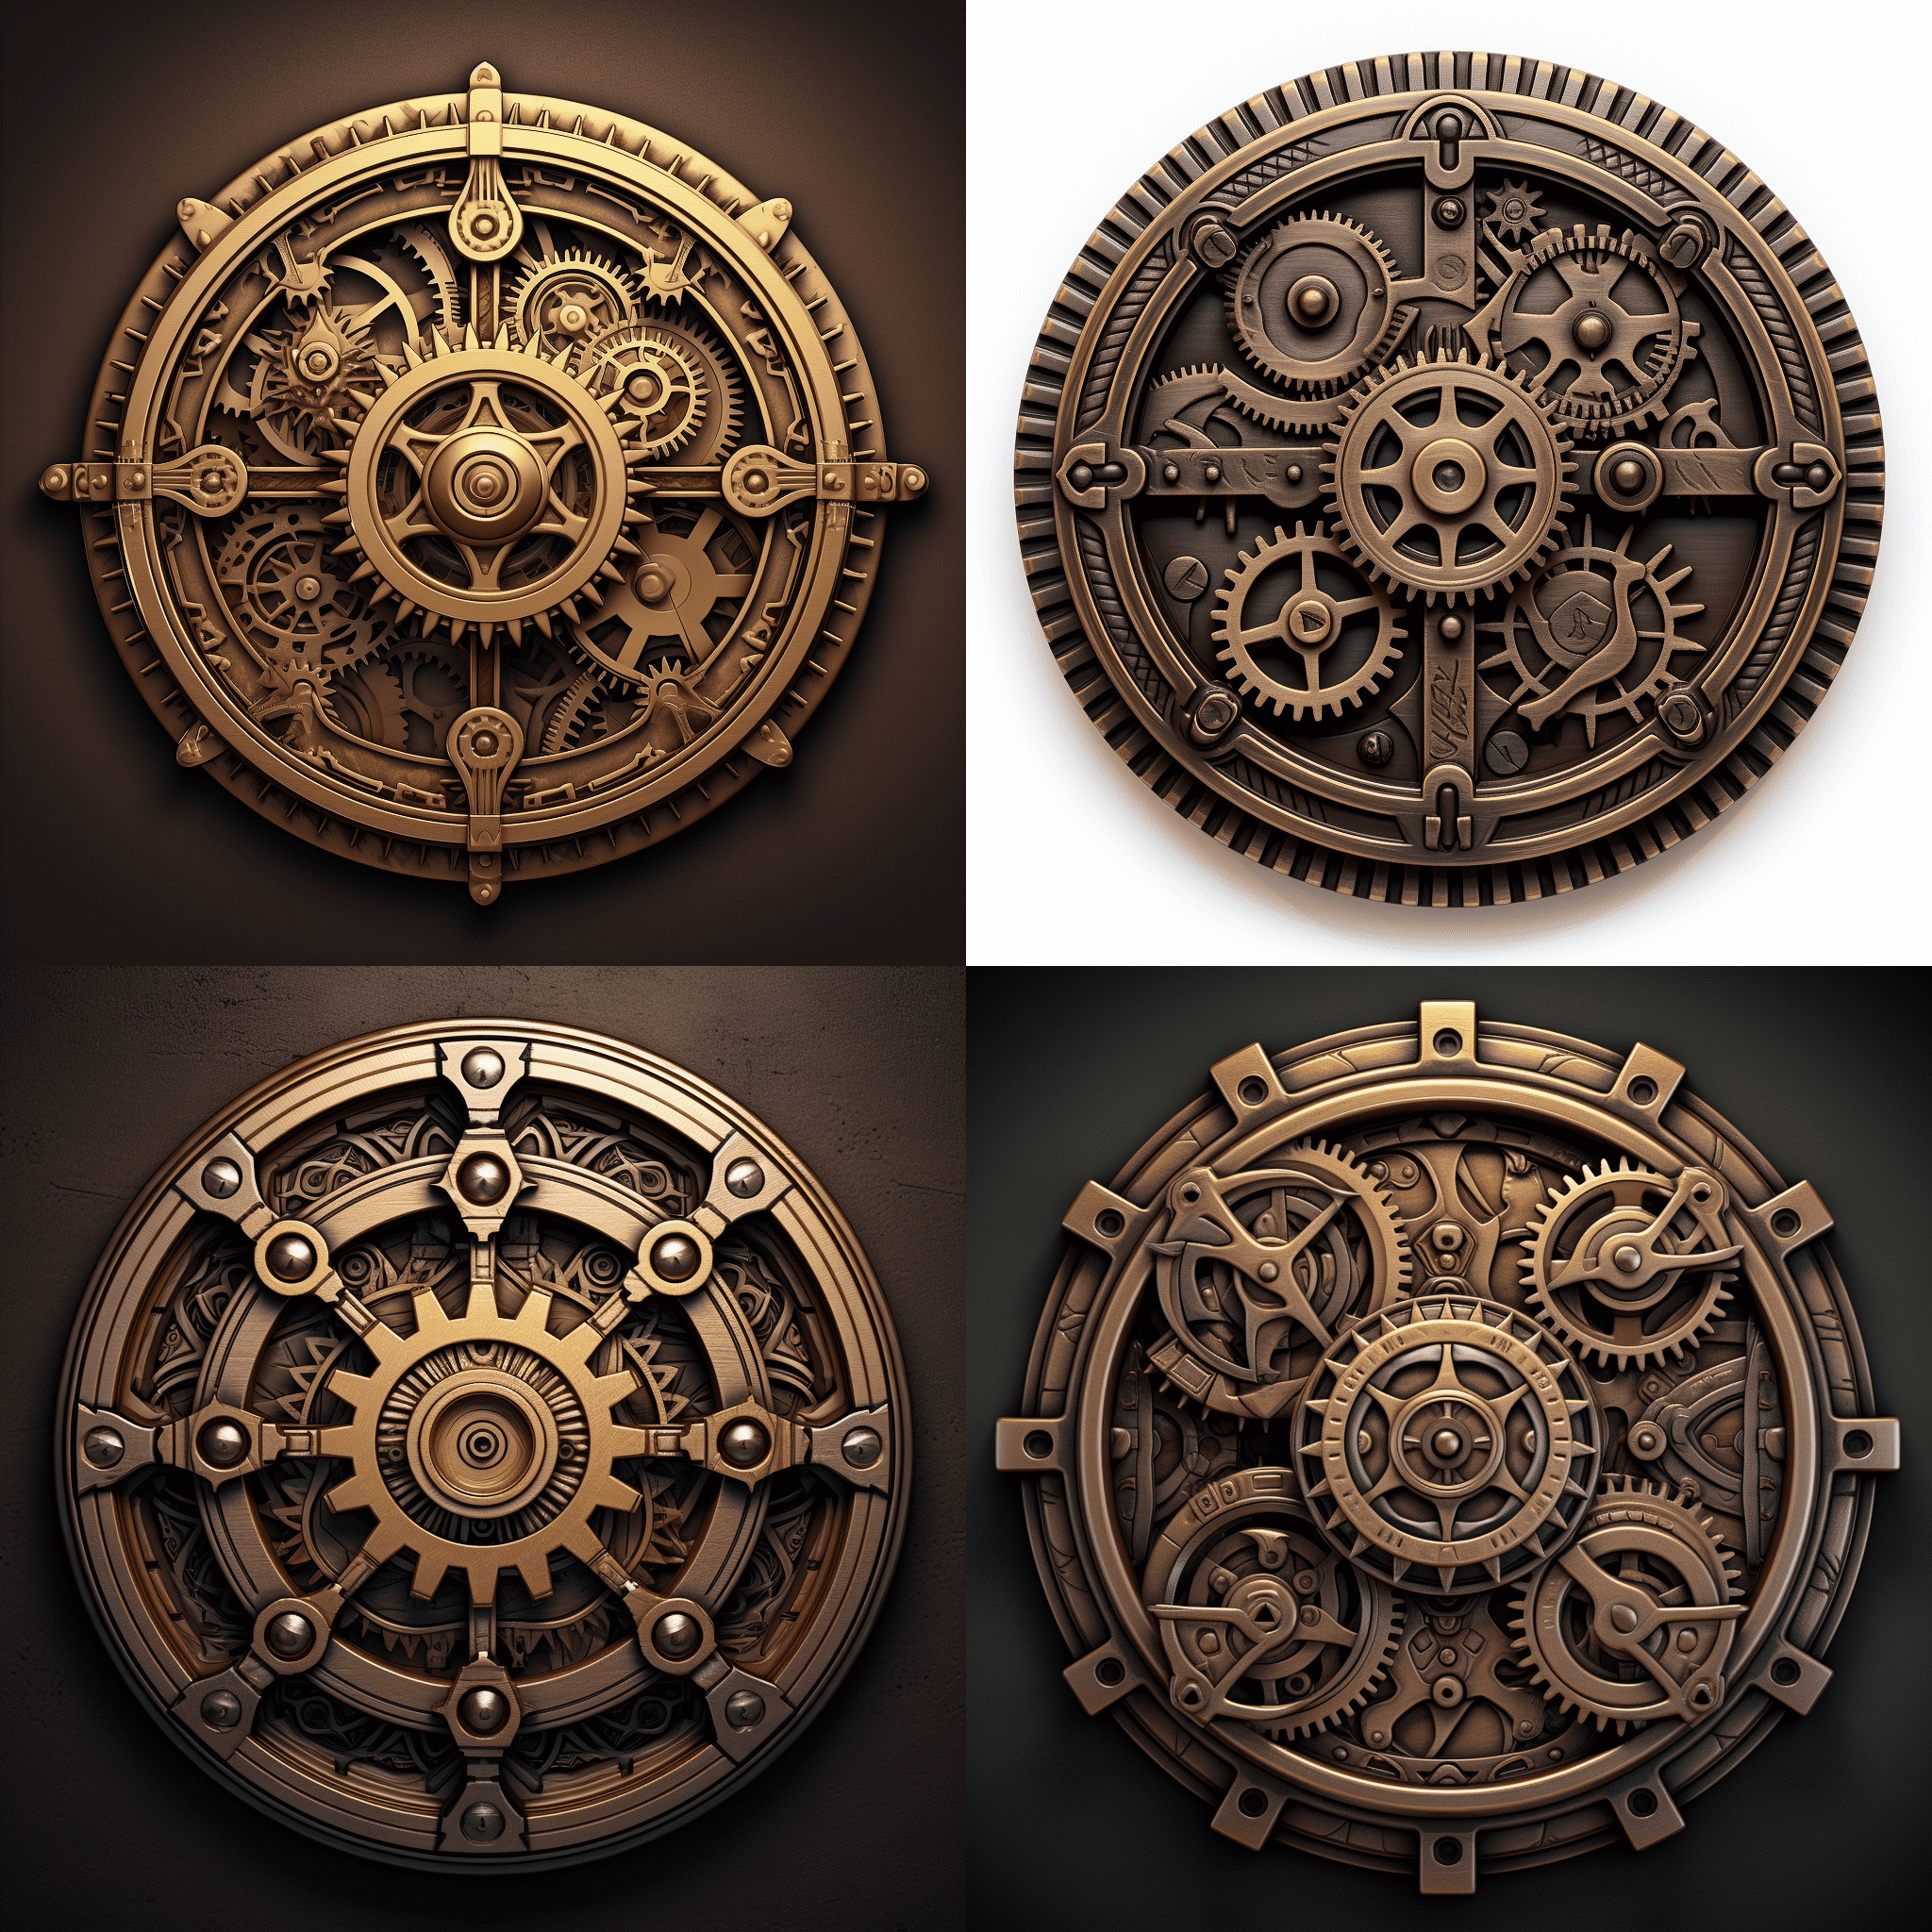 A steampunk-style gear icon with intricate engravings and a bronze finish. --quality 1